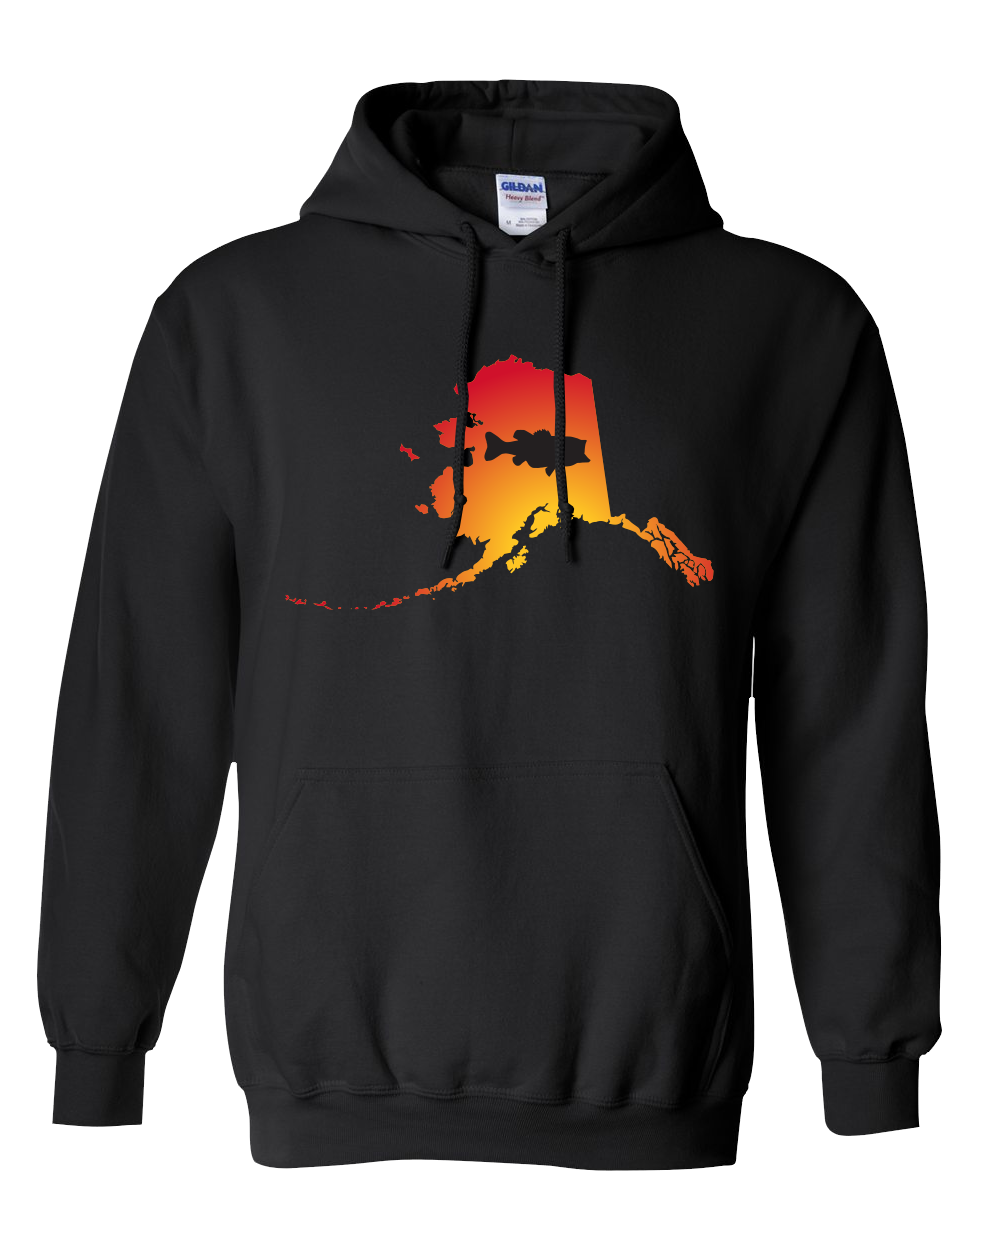 Pullover Hooded Sweatshirt Alaska Black Large Mouth Bass Vibrant Design High Quality Tight Knit Ring Spun Low Maintenance Cotton Printed With The Newest Available Color Transfer Technology